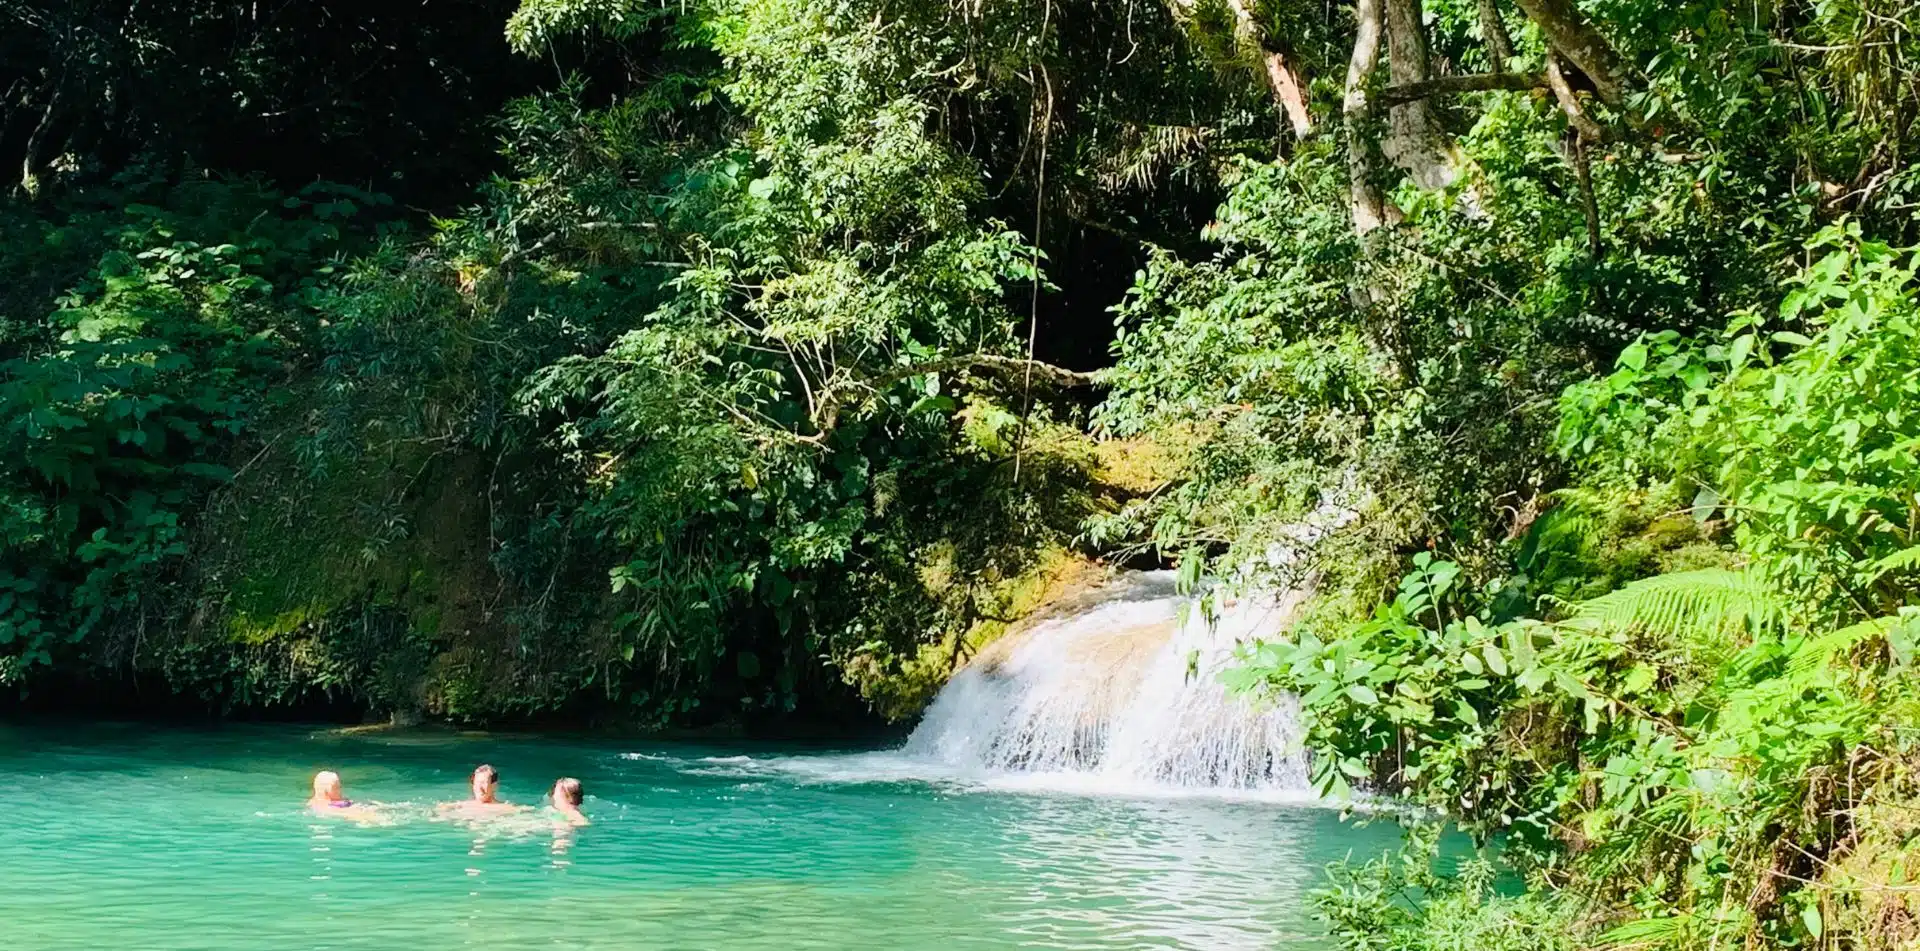 Get the opportunity to swim near jaw dropping waterfalls in the Escambray Mountains